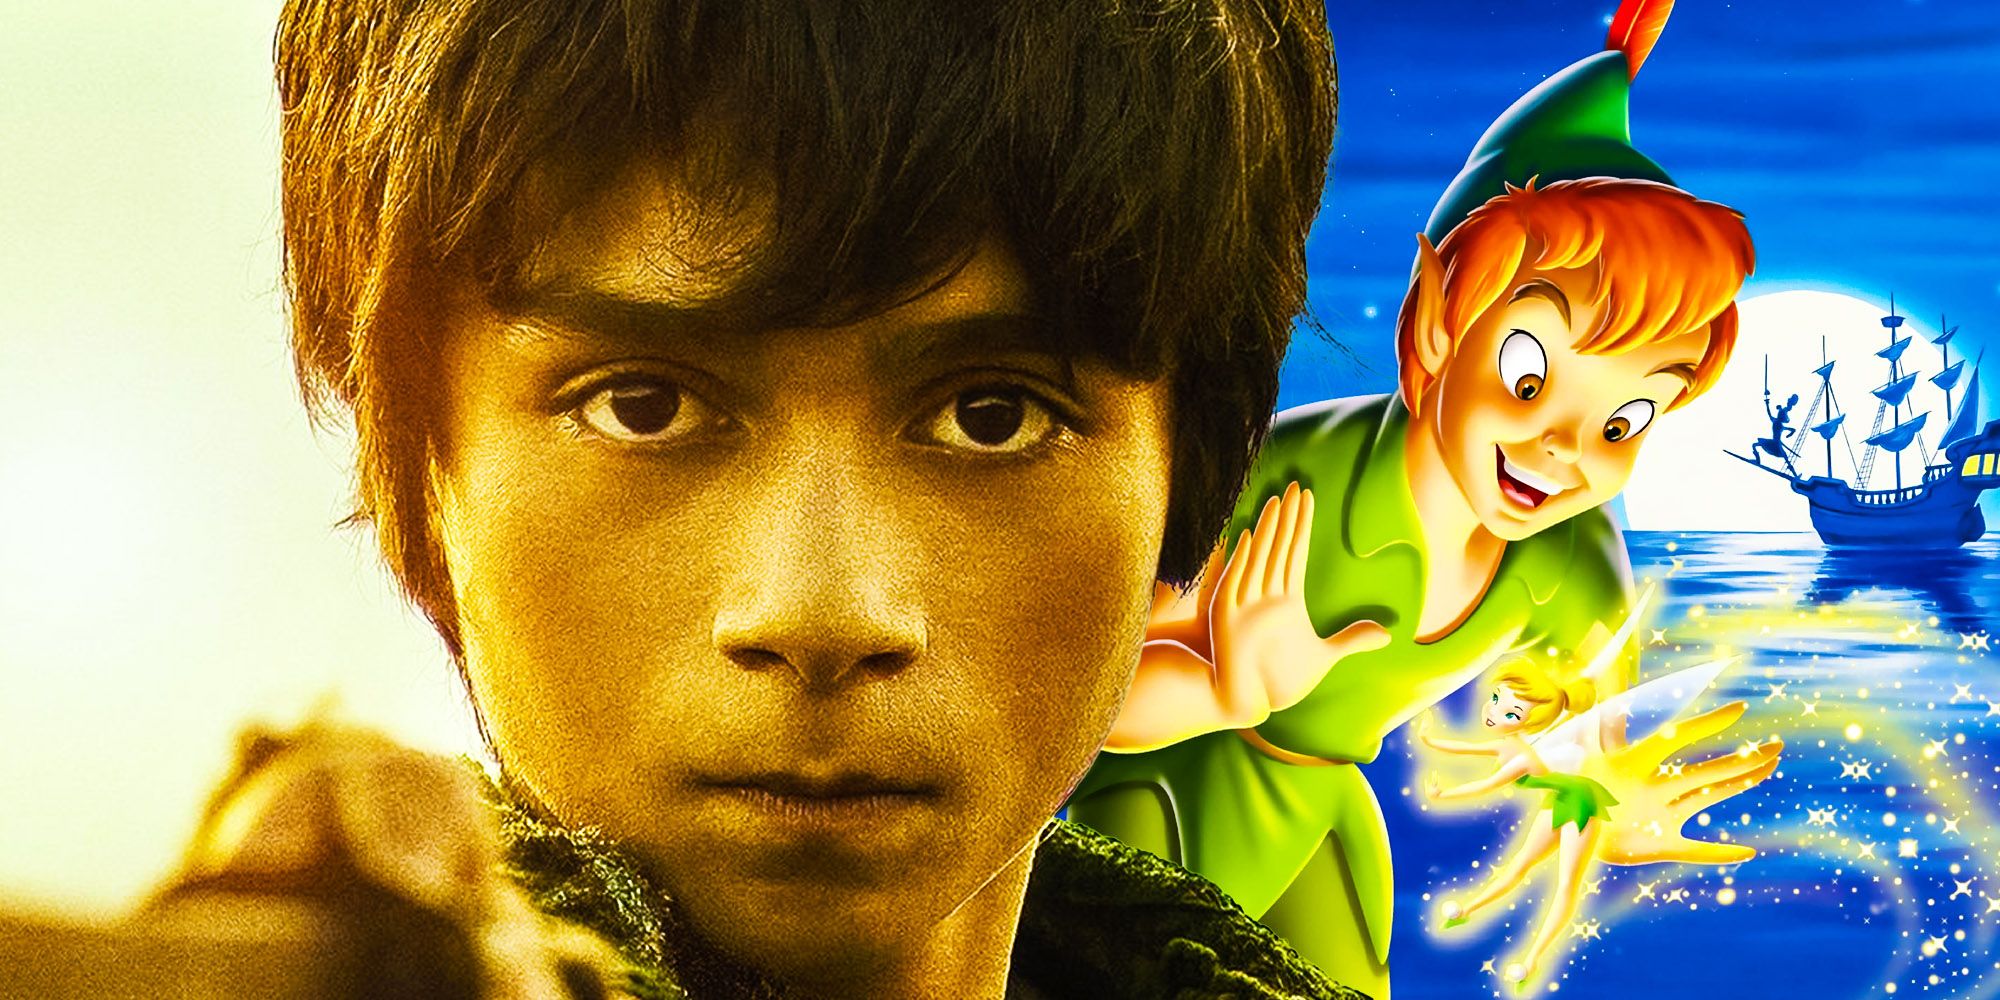 Peter Pan & Wendy': The New Trailer, Release Date & More – Hollywood Life